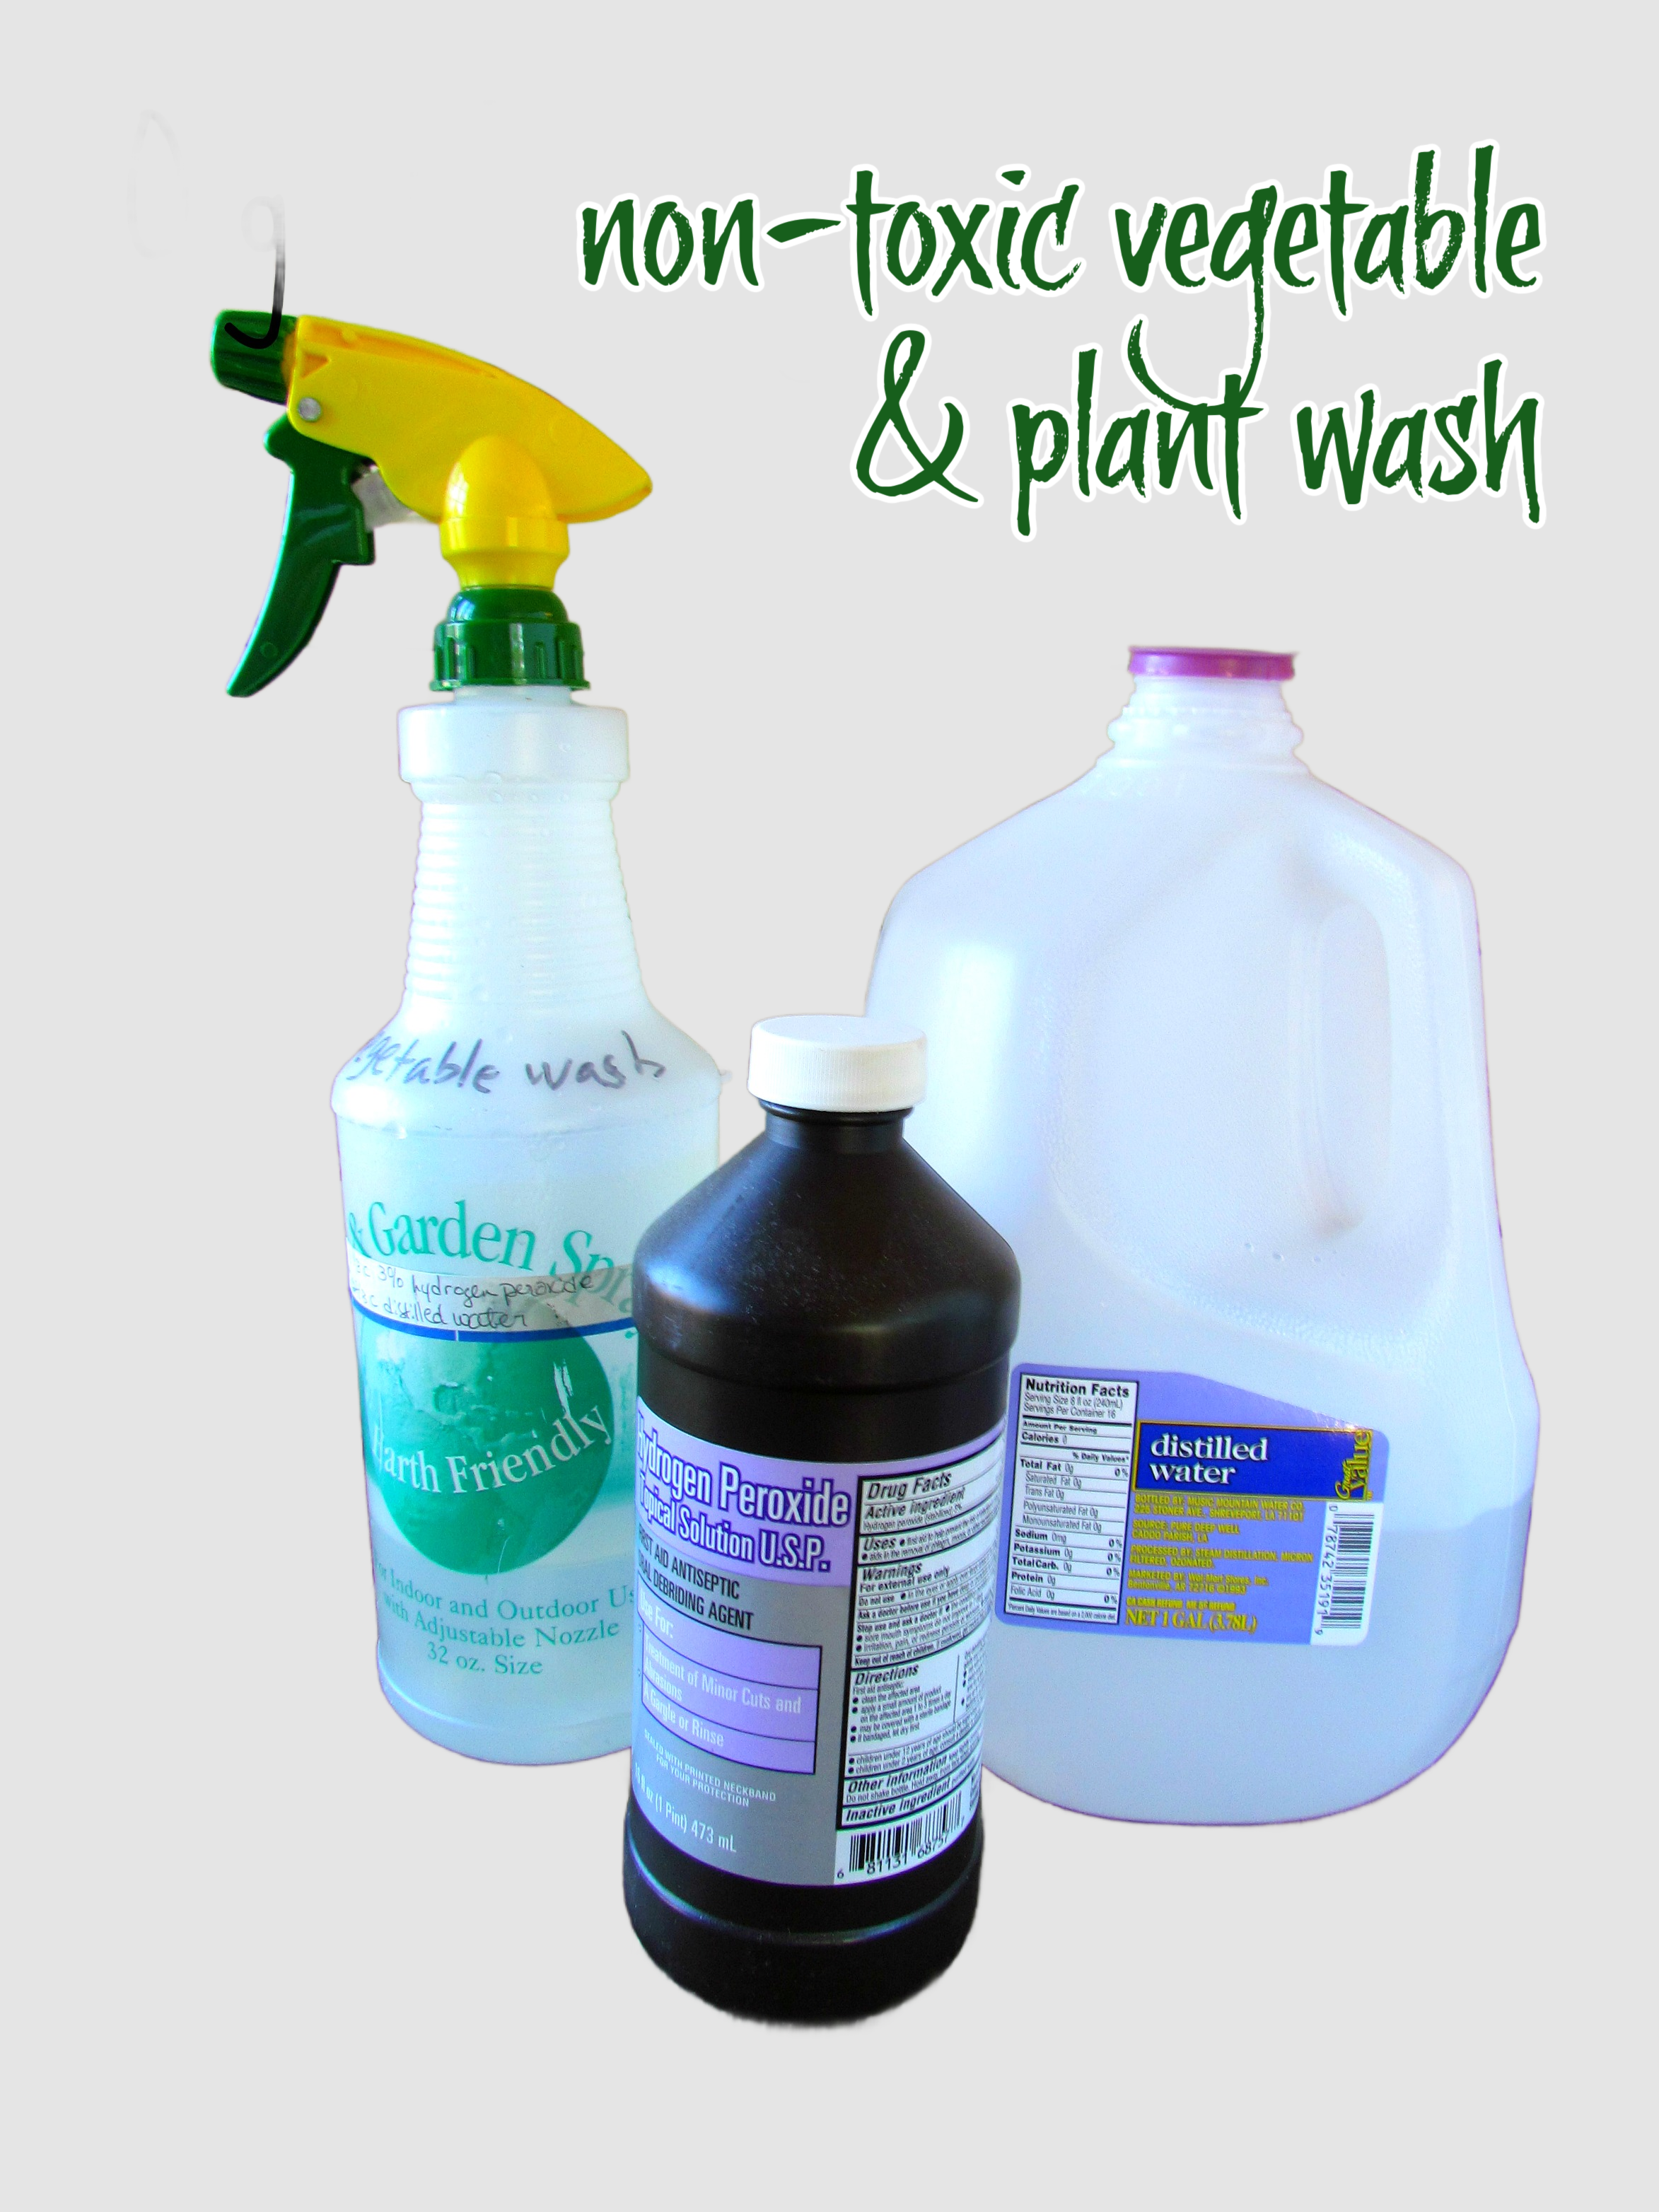 Organic vegetable and plant wash.